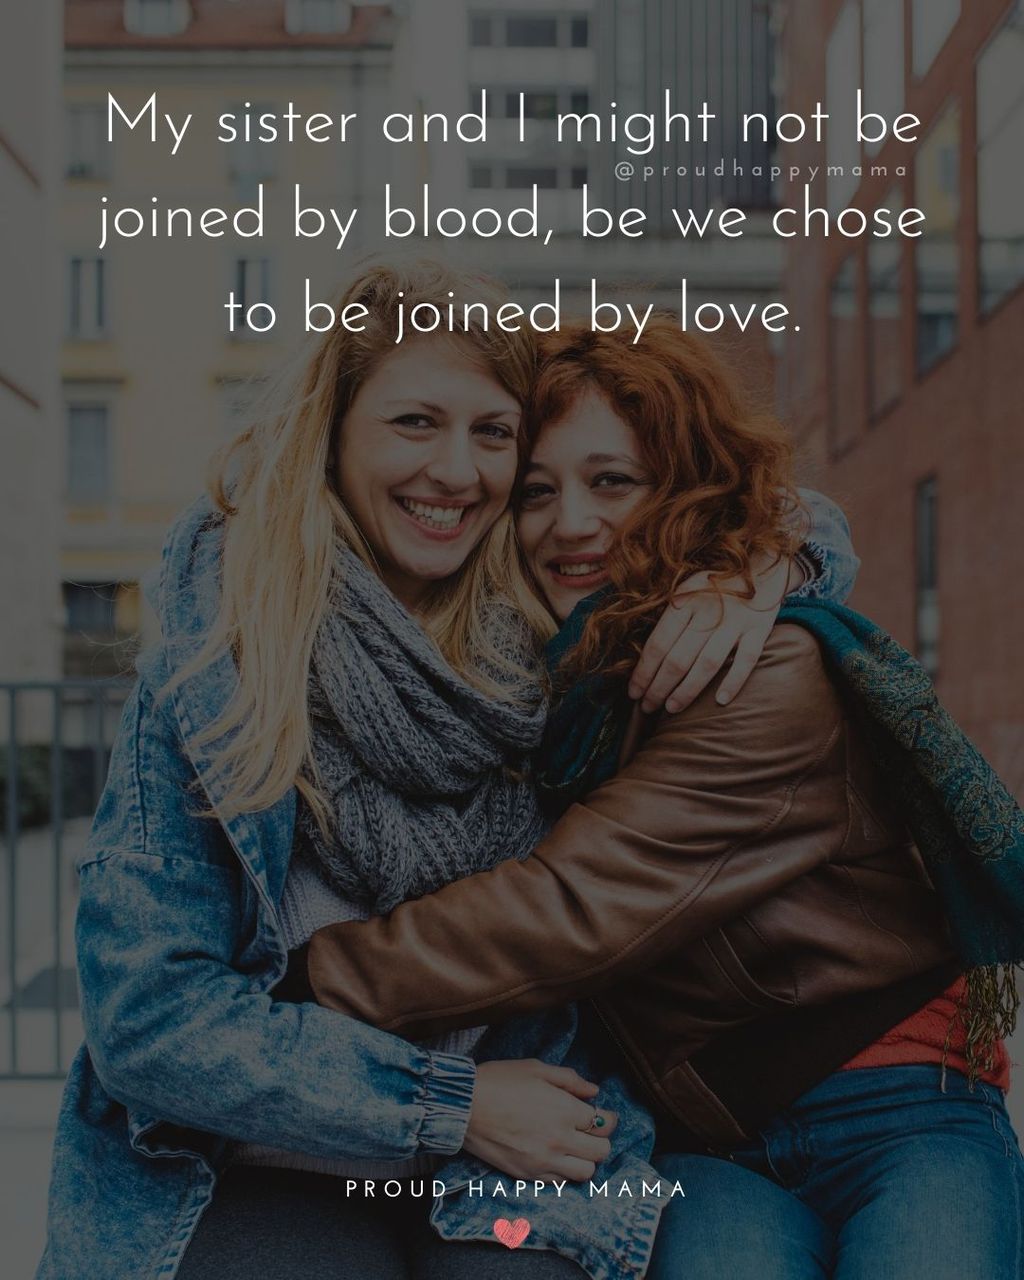 Sister In Law Quotes - My sister and I might not be joined by blood, be we chose to be joined by love.